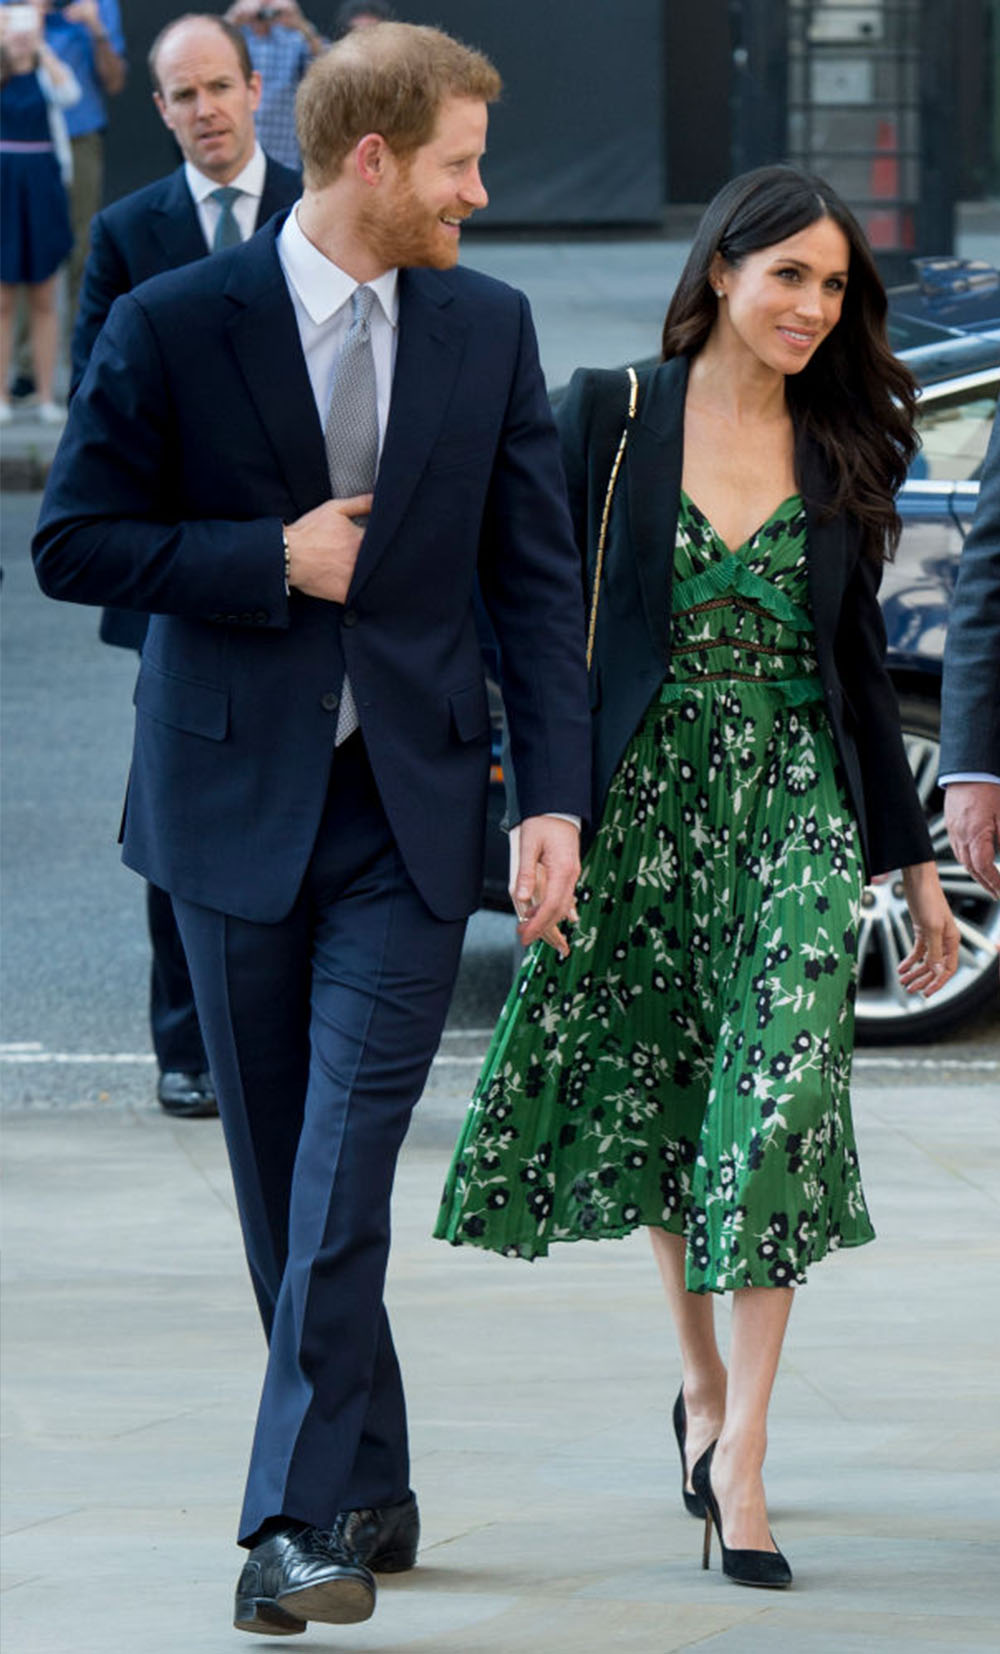 April 21, 2018: Meghan Markle and Prince Harry attend the Invictus Games Reception at Australia House in London. Meghan wears light Self-Portrait floral number given London’s current ‘heat wave’, pairing it with a blazer, black Manolo Blahnik heels and a Roland Mouret cross-body bag, which, unsurprisingly, has already sold out_meghan-markle-style-file_gallery-1000-1250